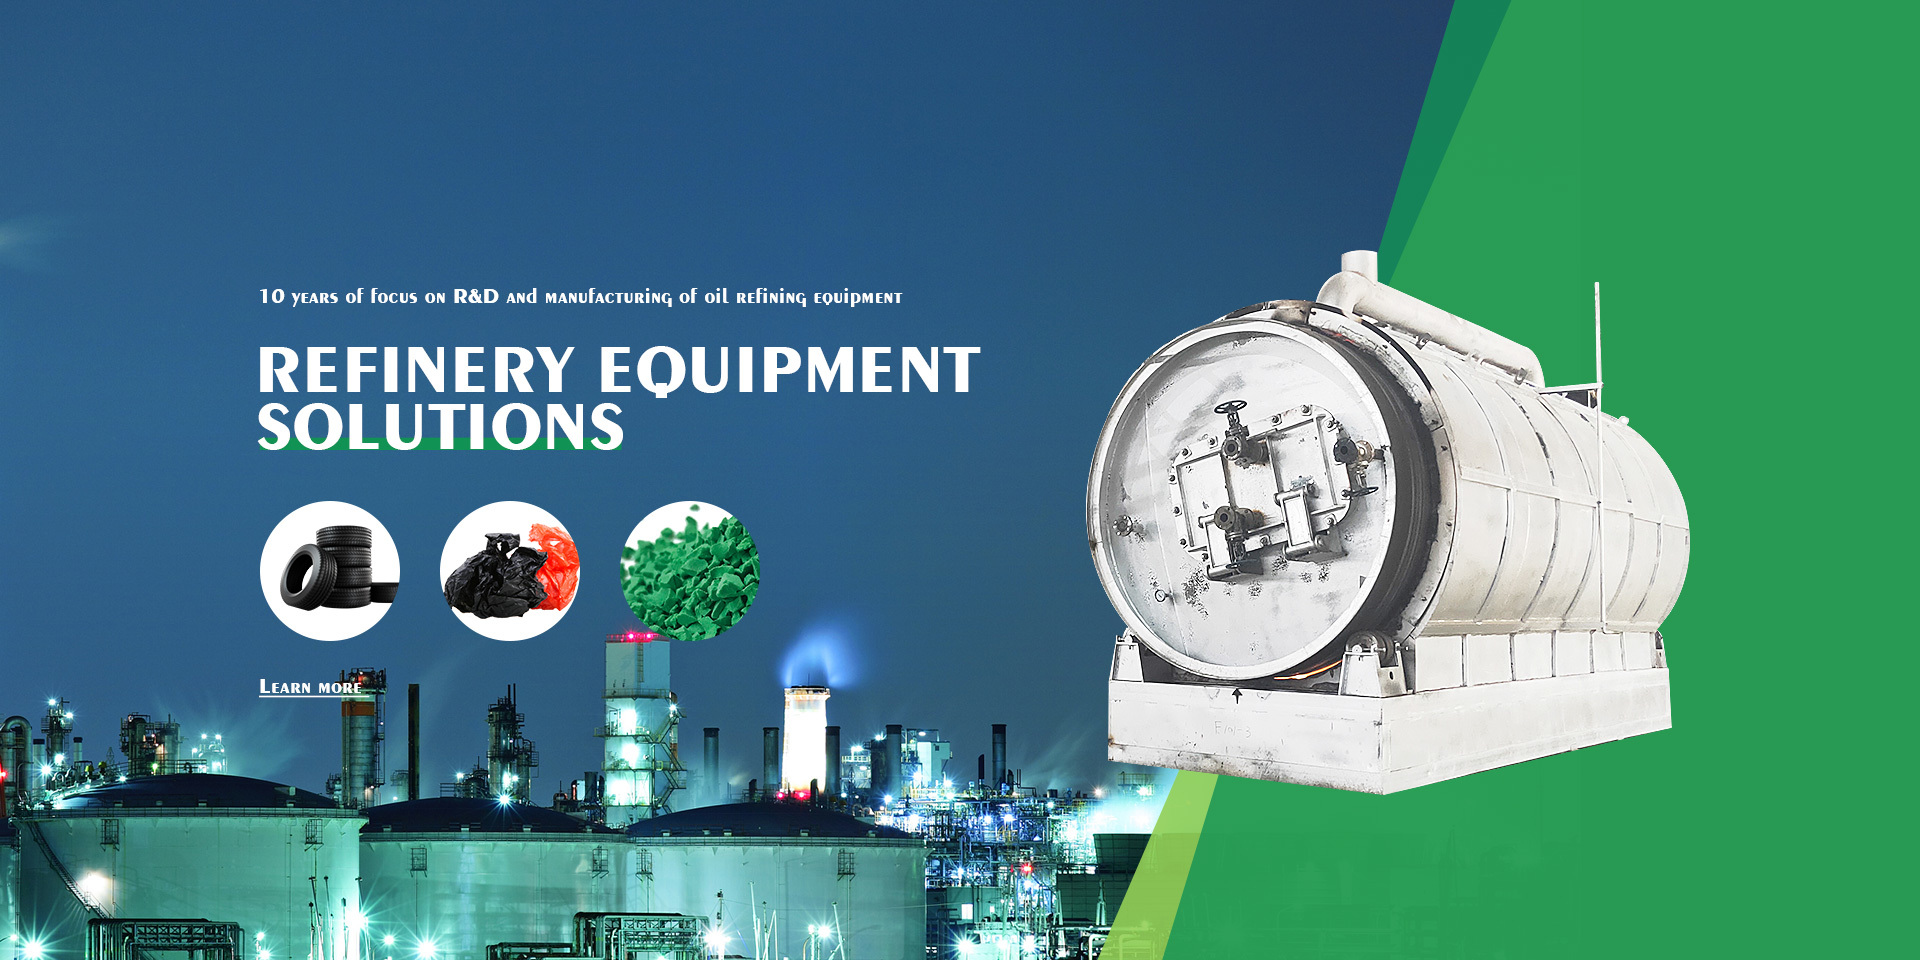 REFINERY EQUIPMENT SOLUTIONS